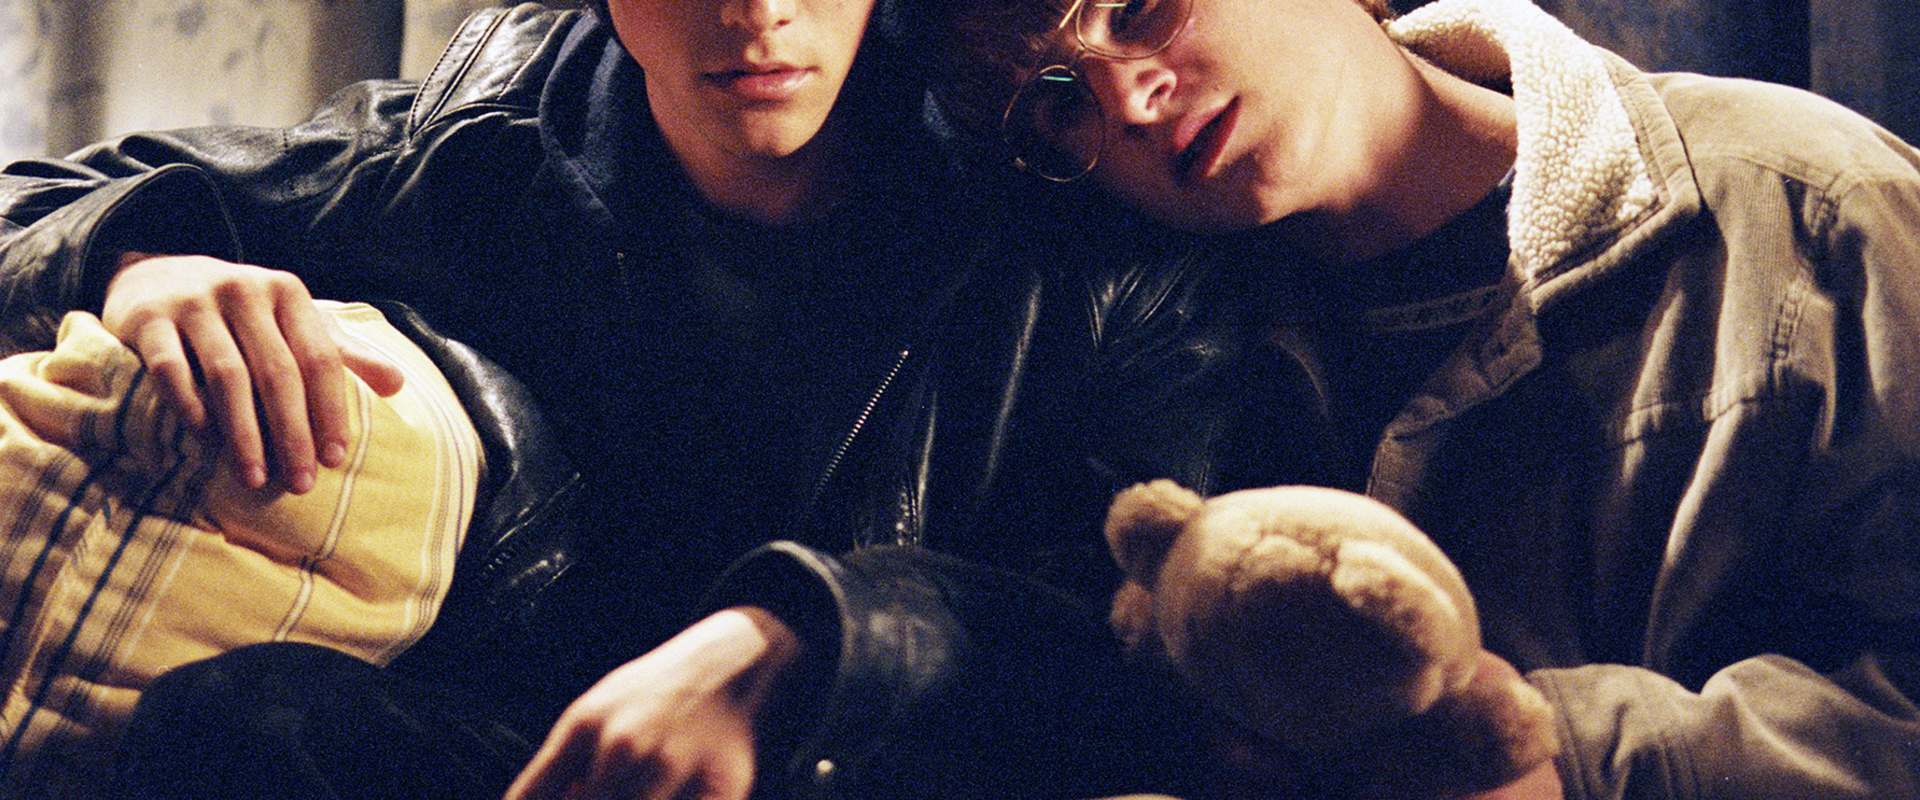 Mysterious Skin background 2